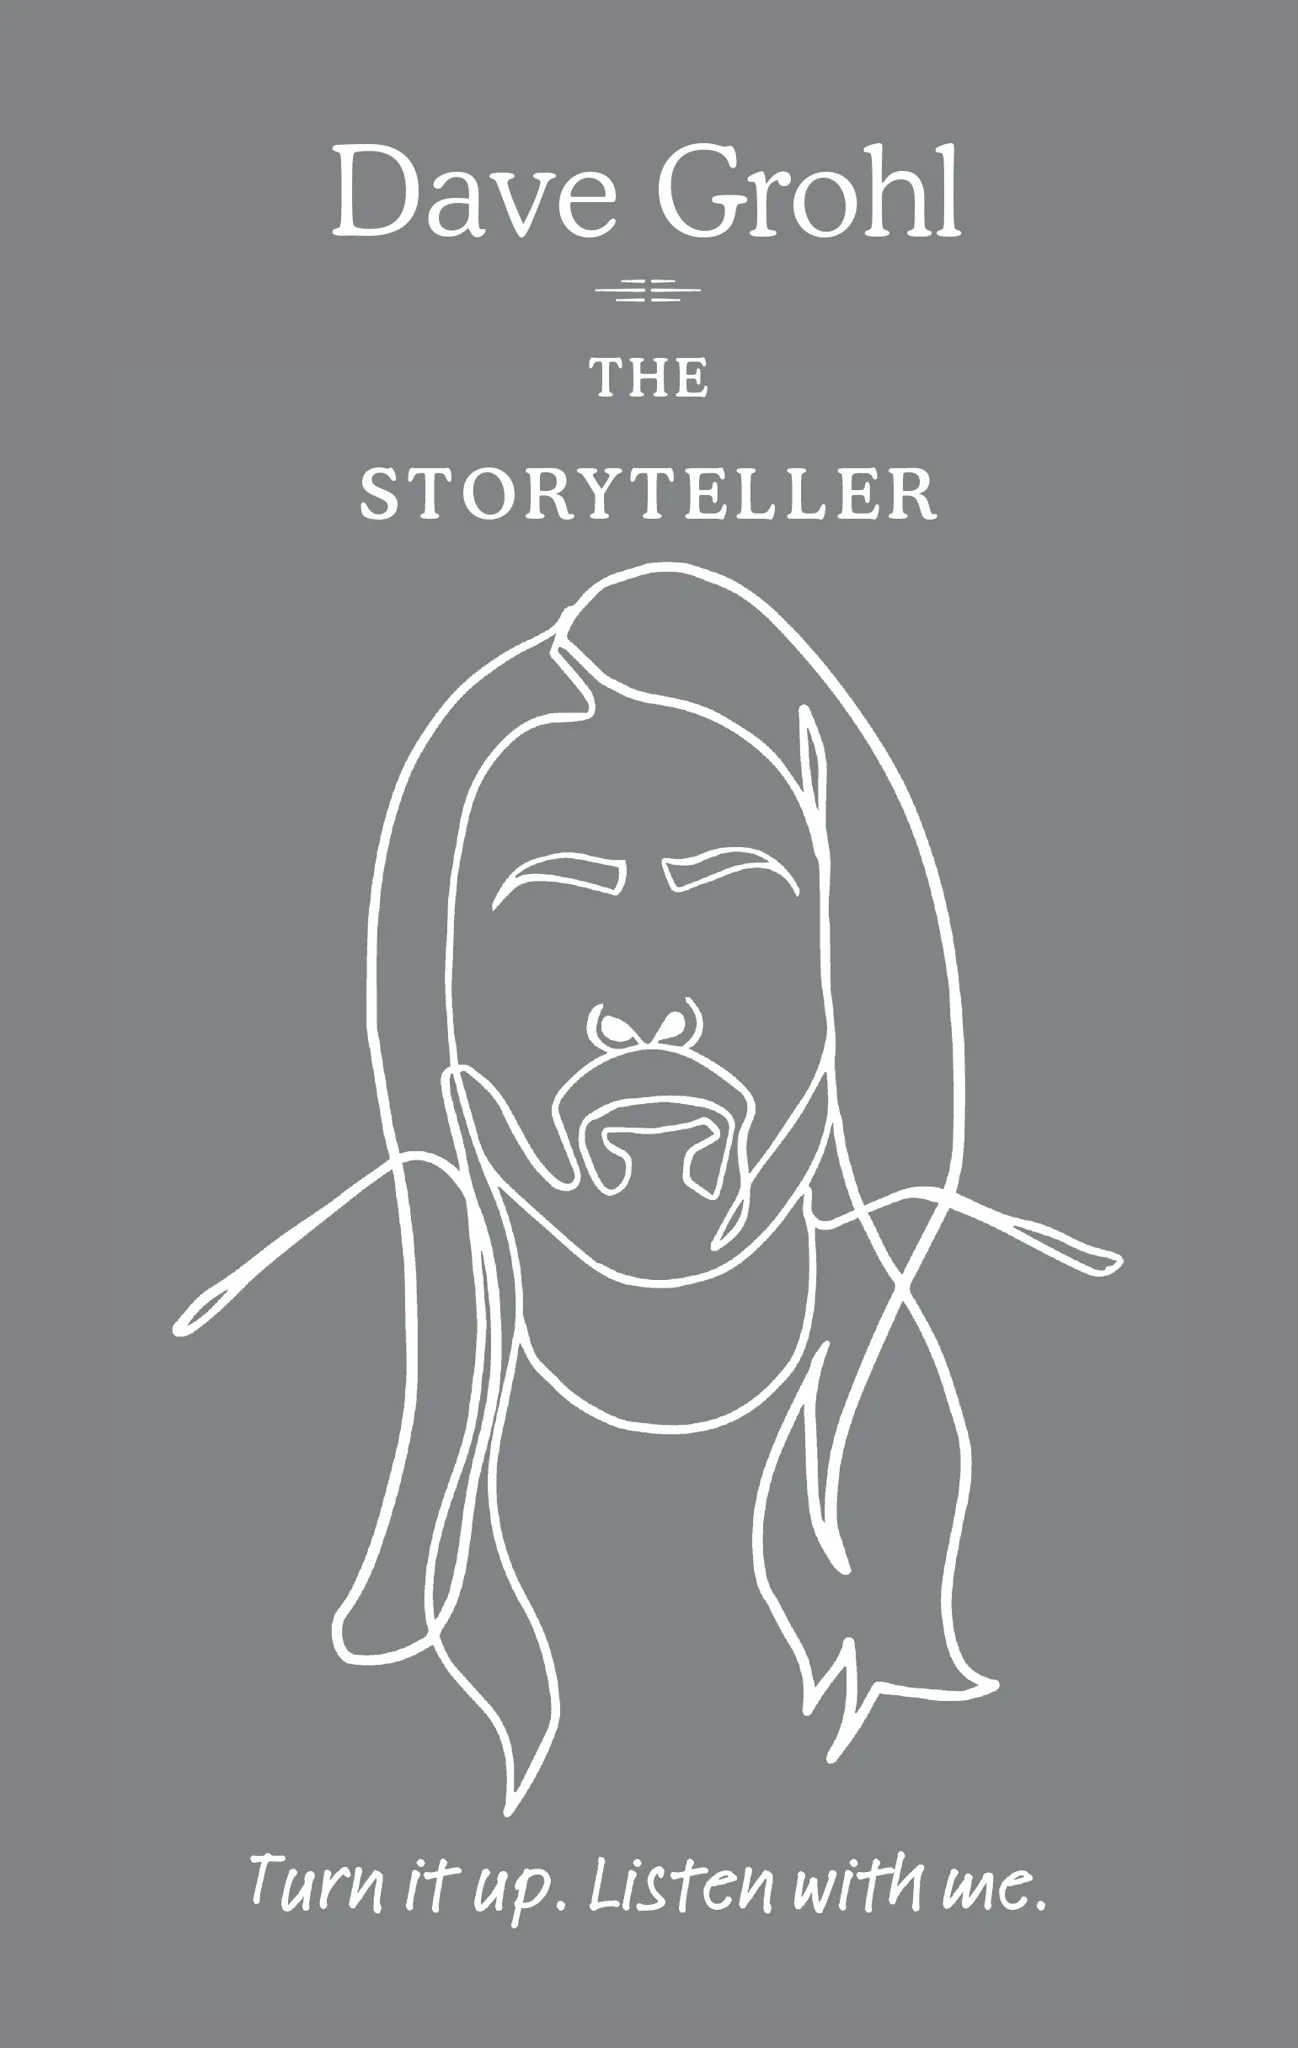 Album artwork for The Storyteller: Tales of Life and Music by Dave Grohl